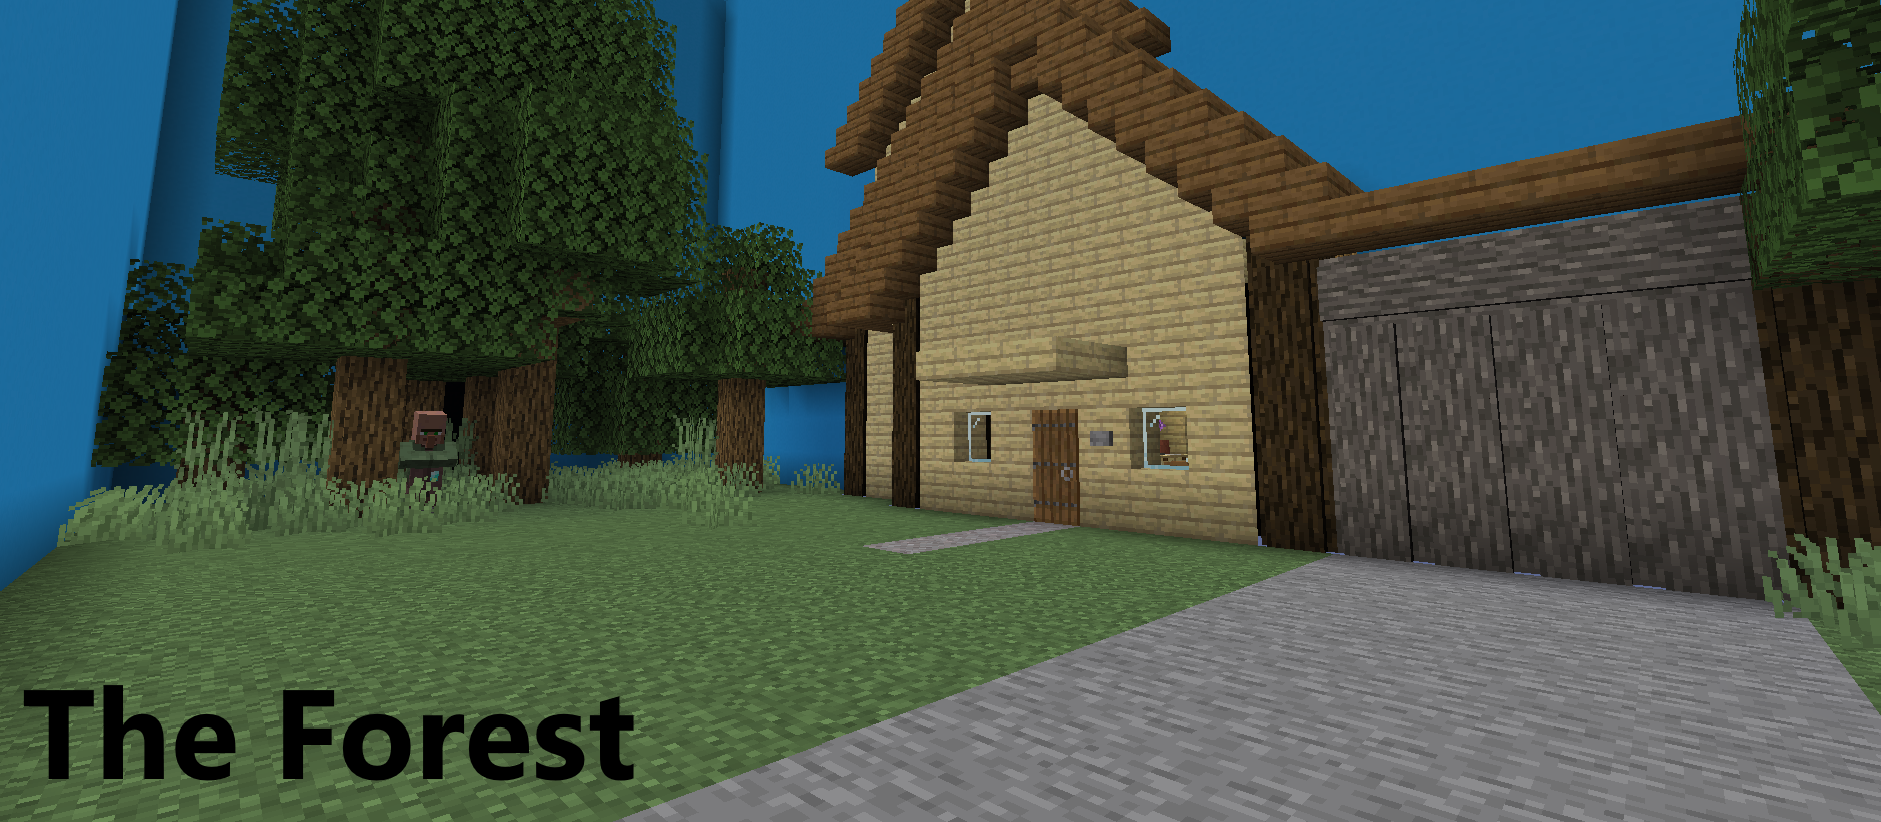 Download The Forest for Minecraft 1.14.1